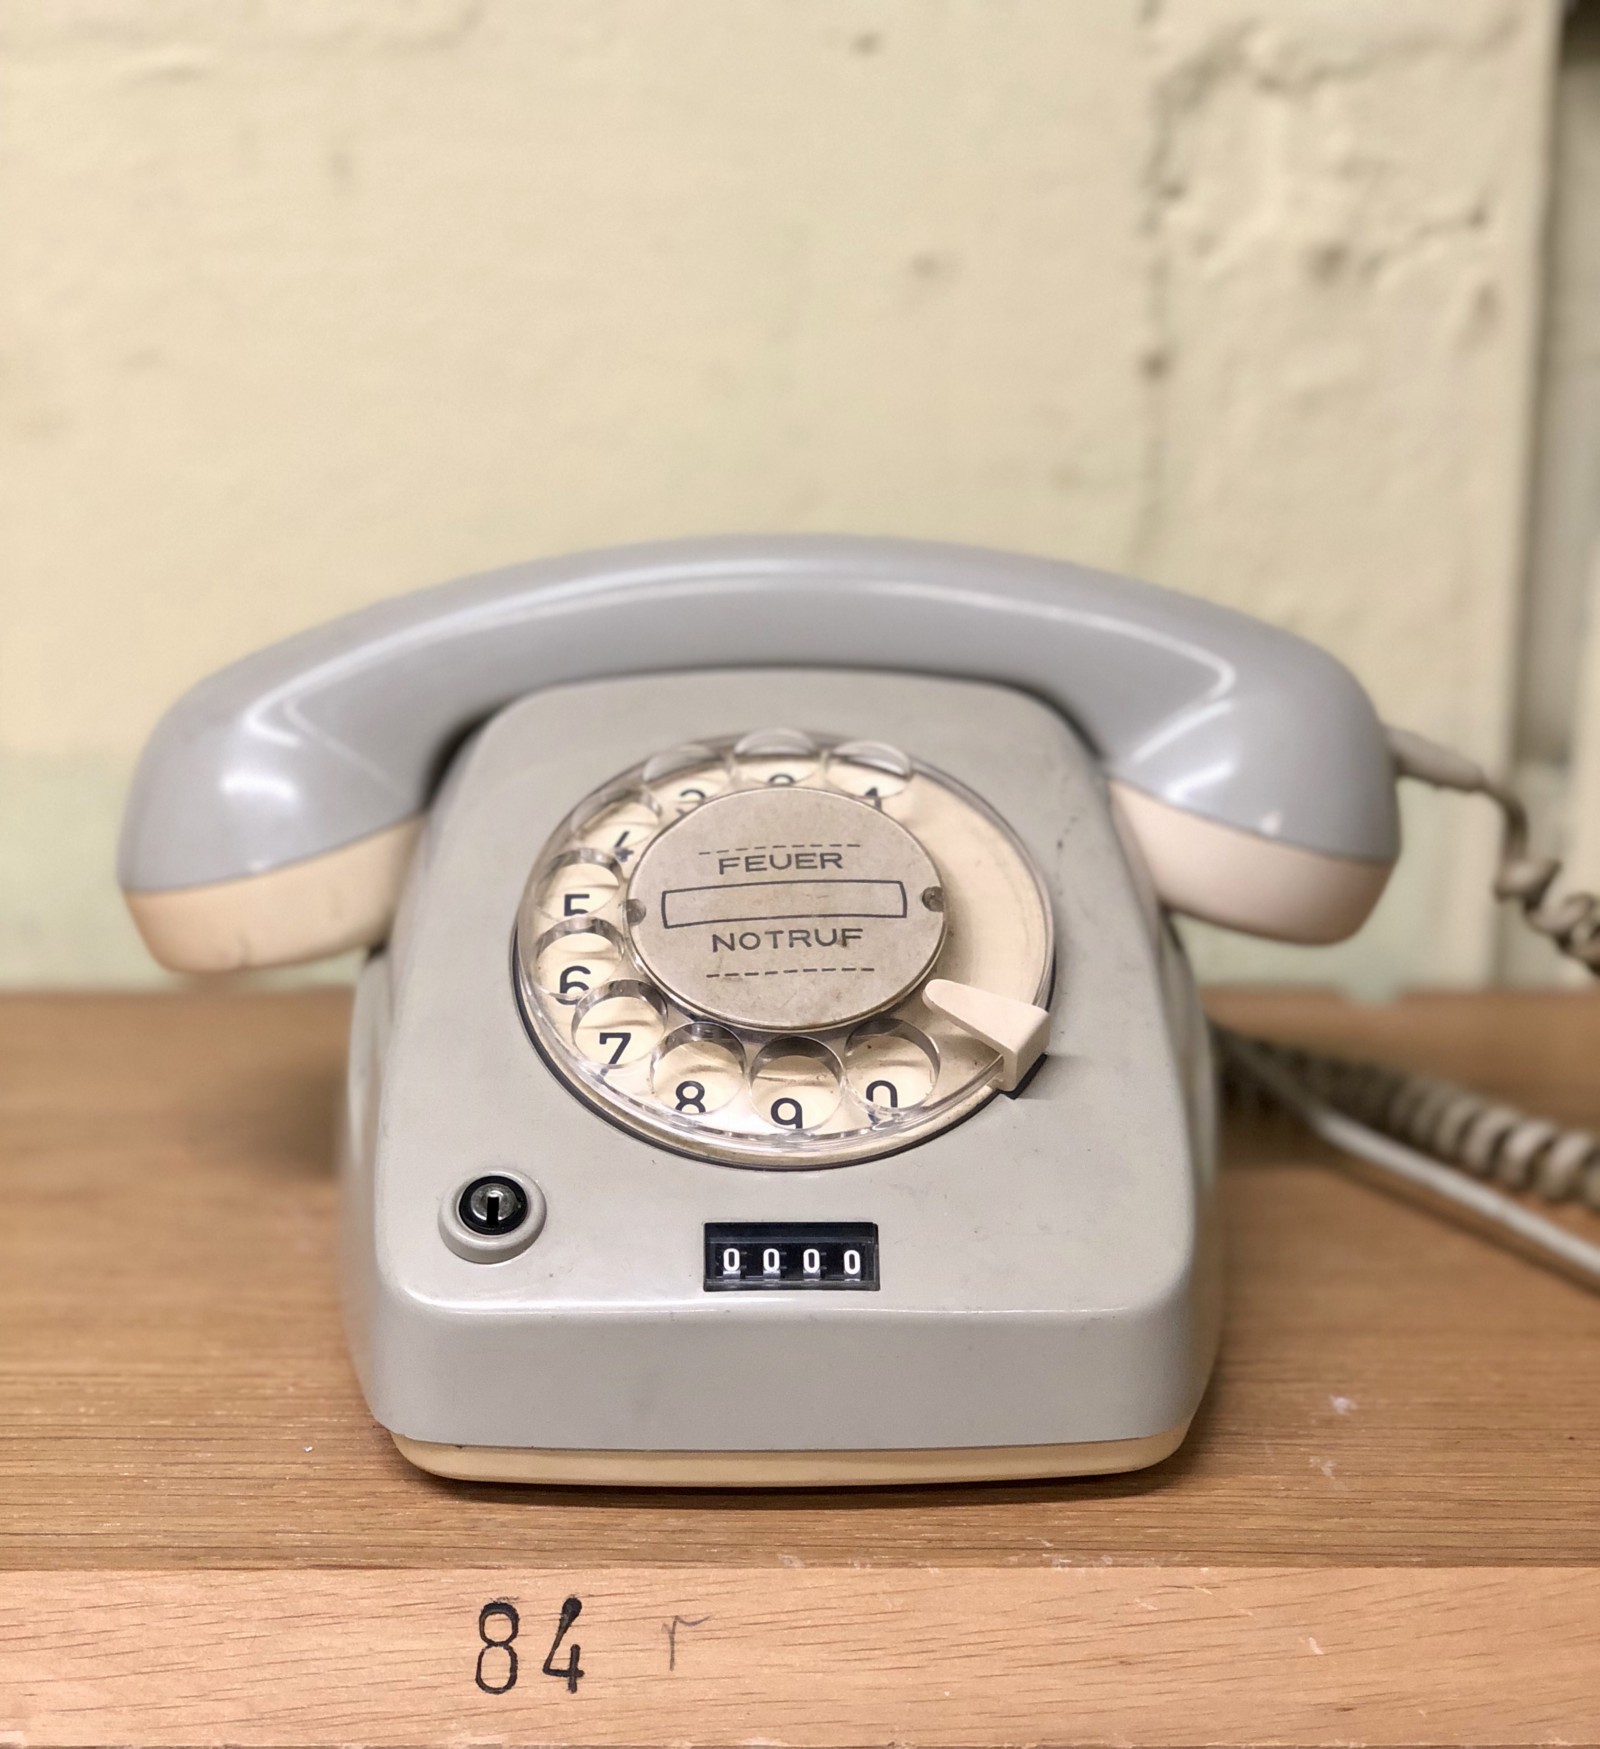 gray rotary telephone on brown table” by Eckhard Hoehmann on Unsplash